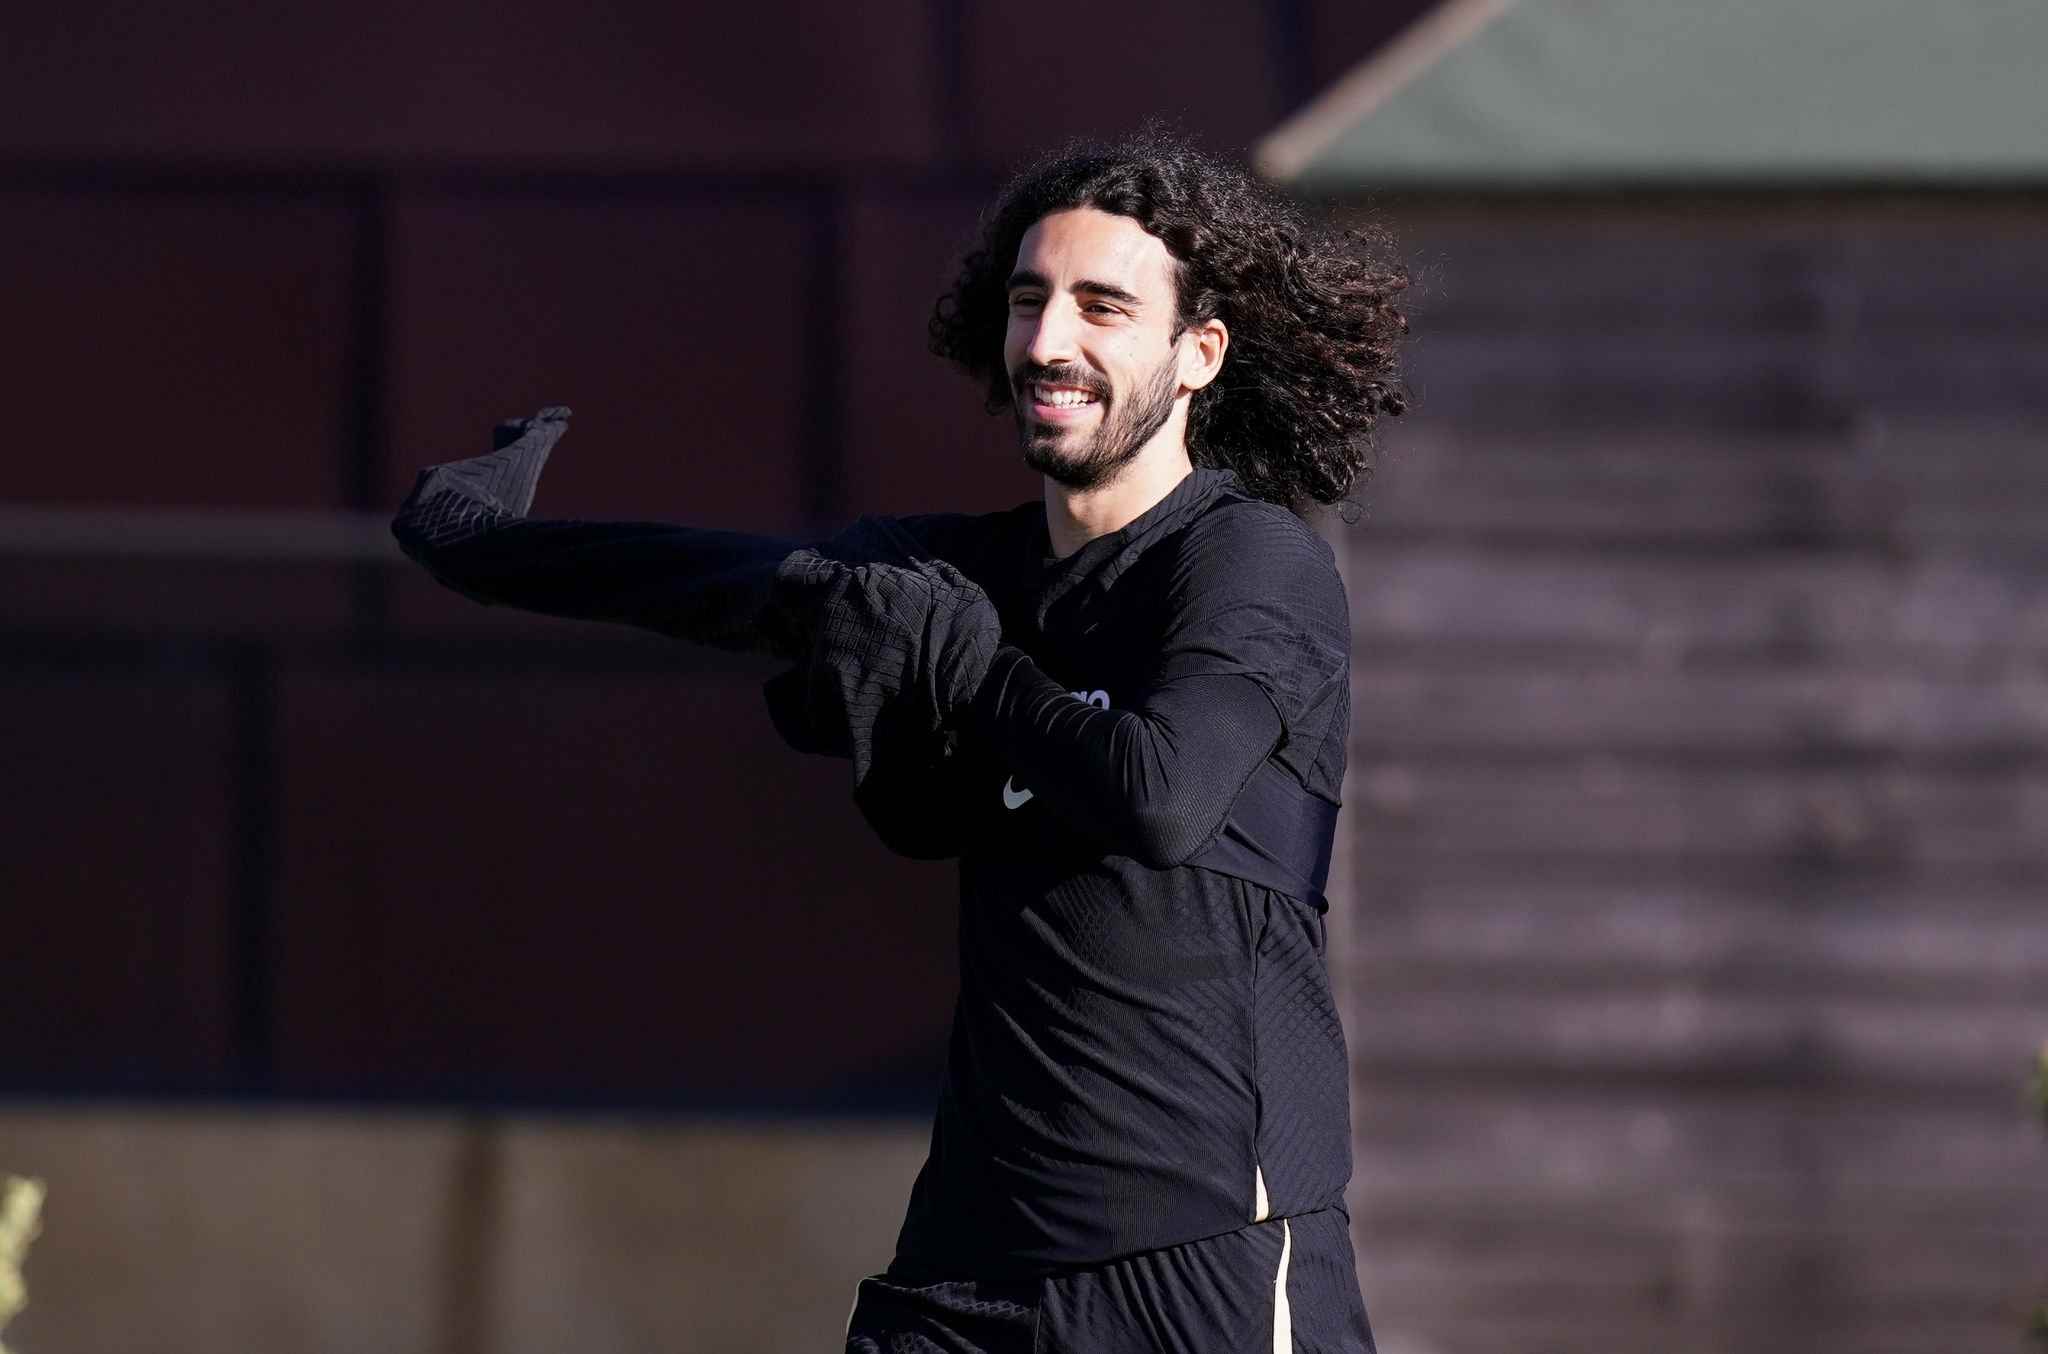 REVEALED: The other reason why Cucurella was replaced after 36 minutes vs Man Utd